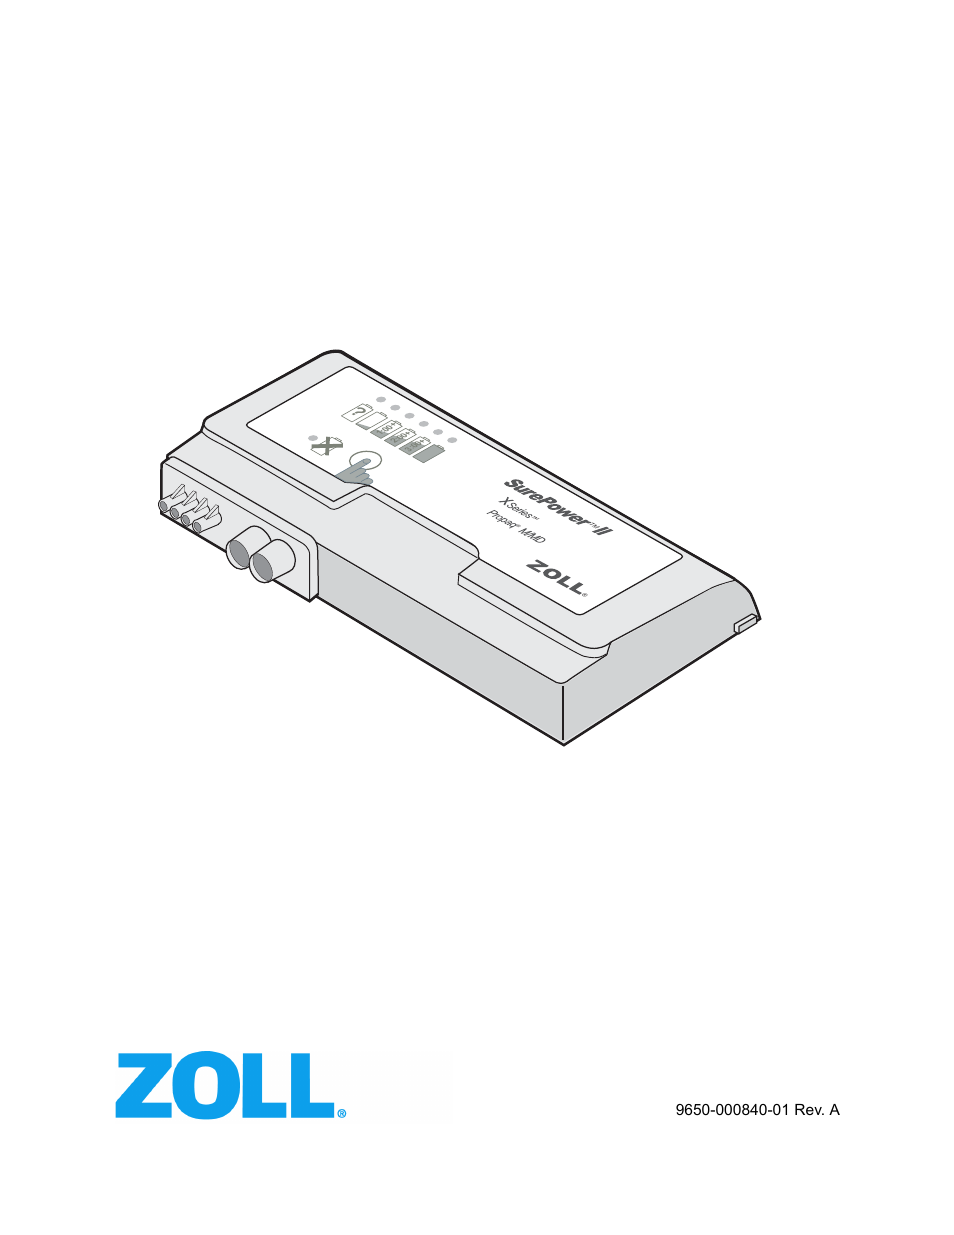 ZOLL X Series Monitor Defibrillator Rev A User Manual | 10 pages